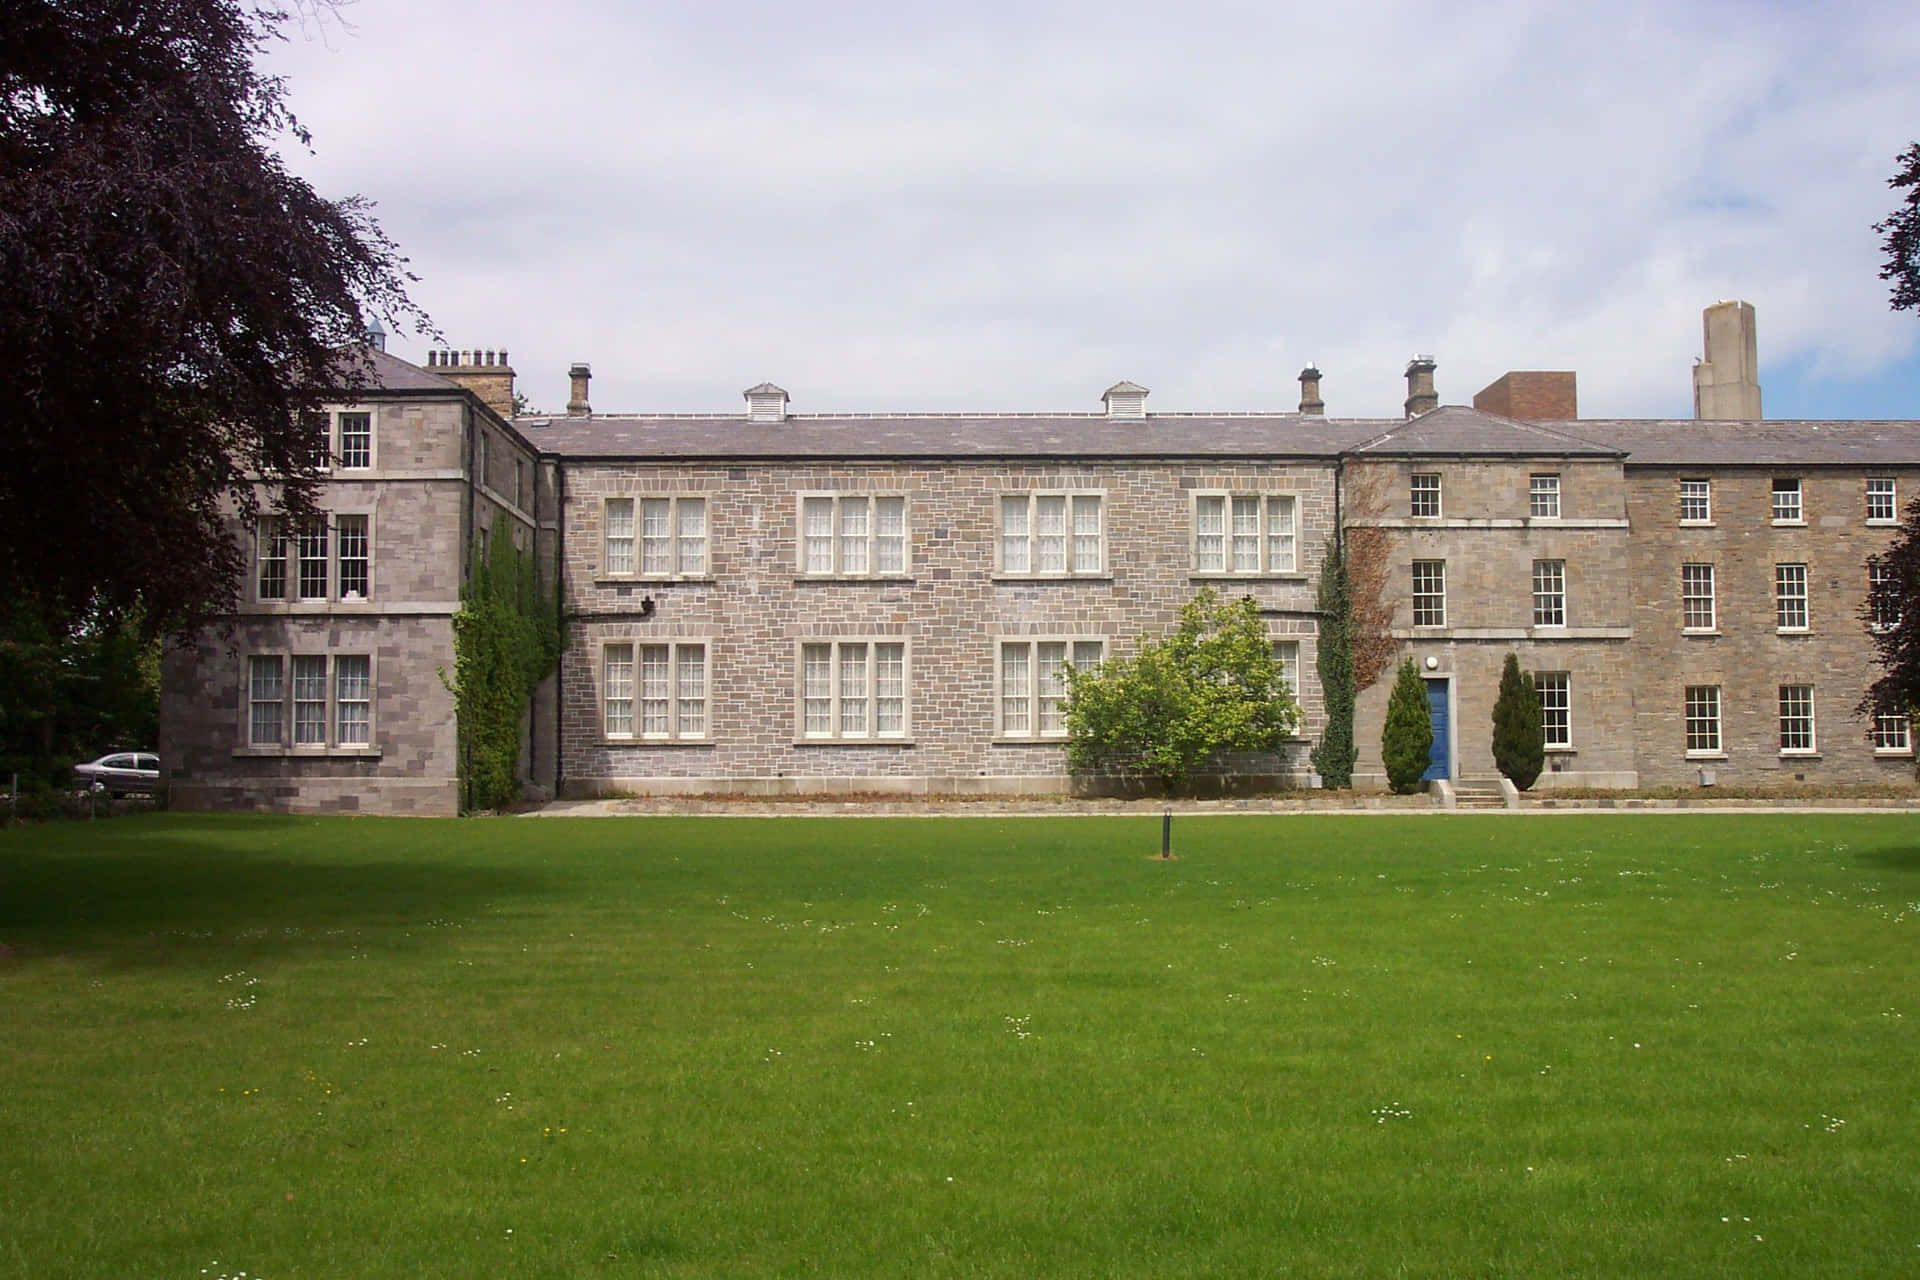 A Large Stone Building With A Green Lawn